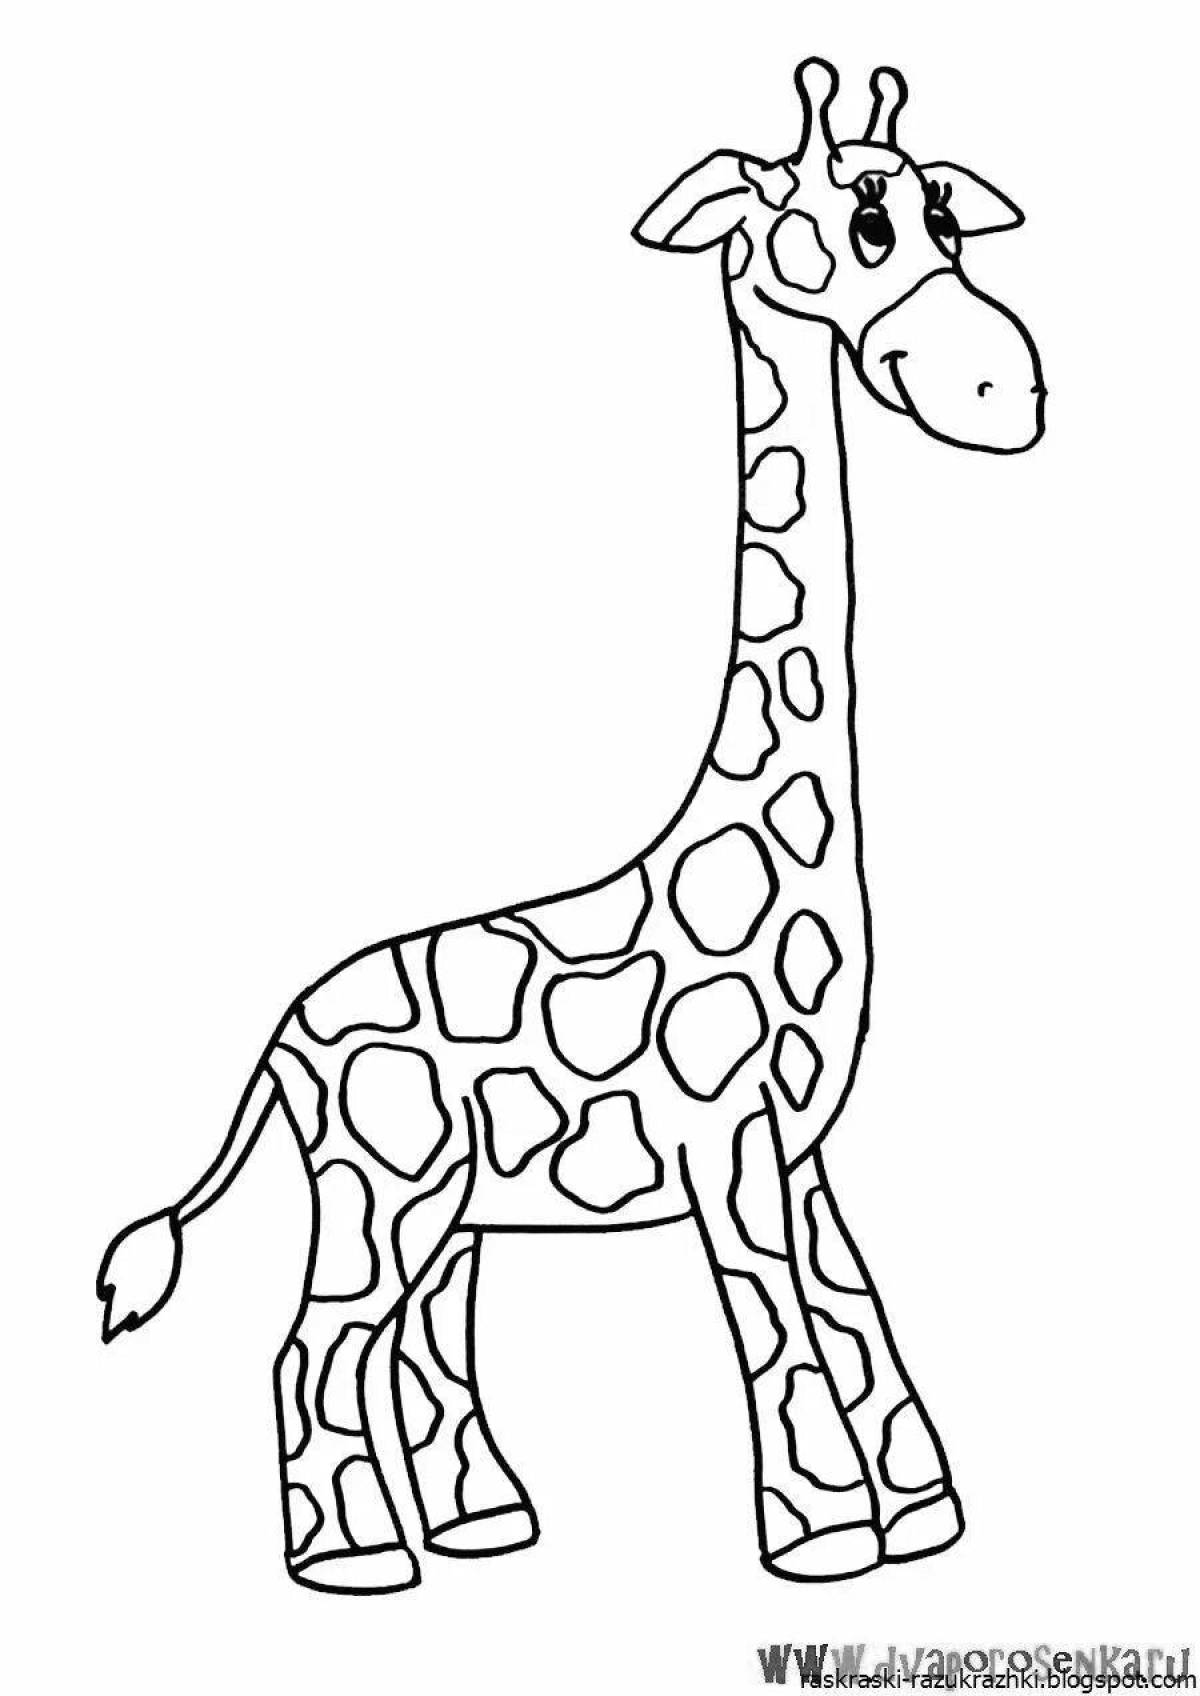 Awesome giraffe coloring pages for kids